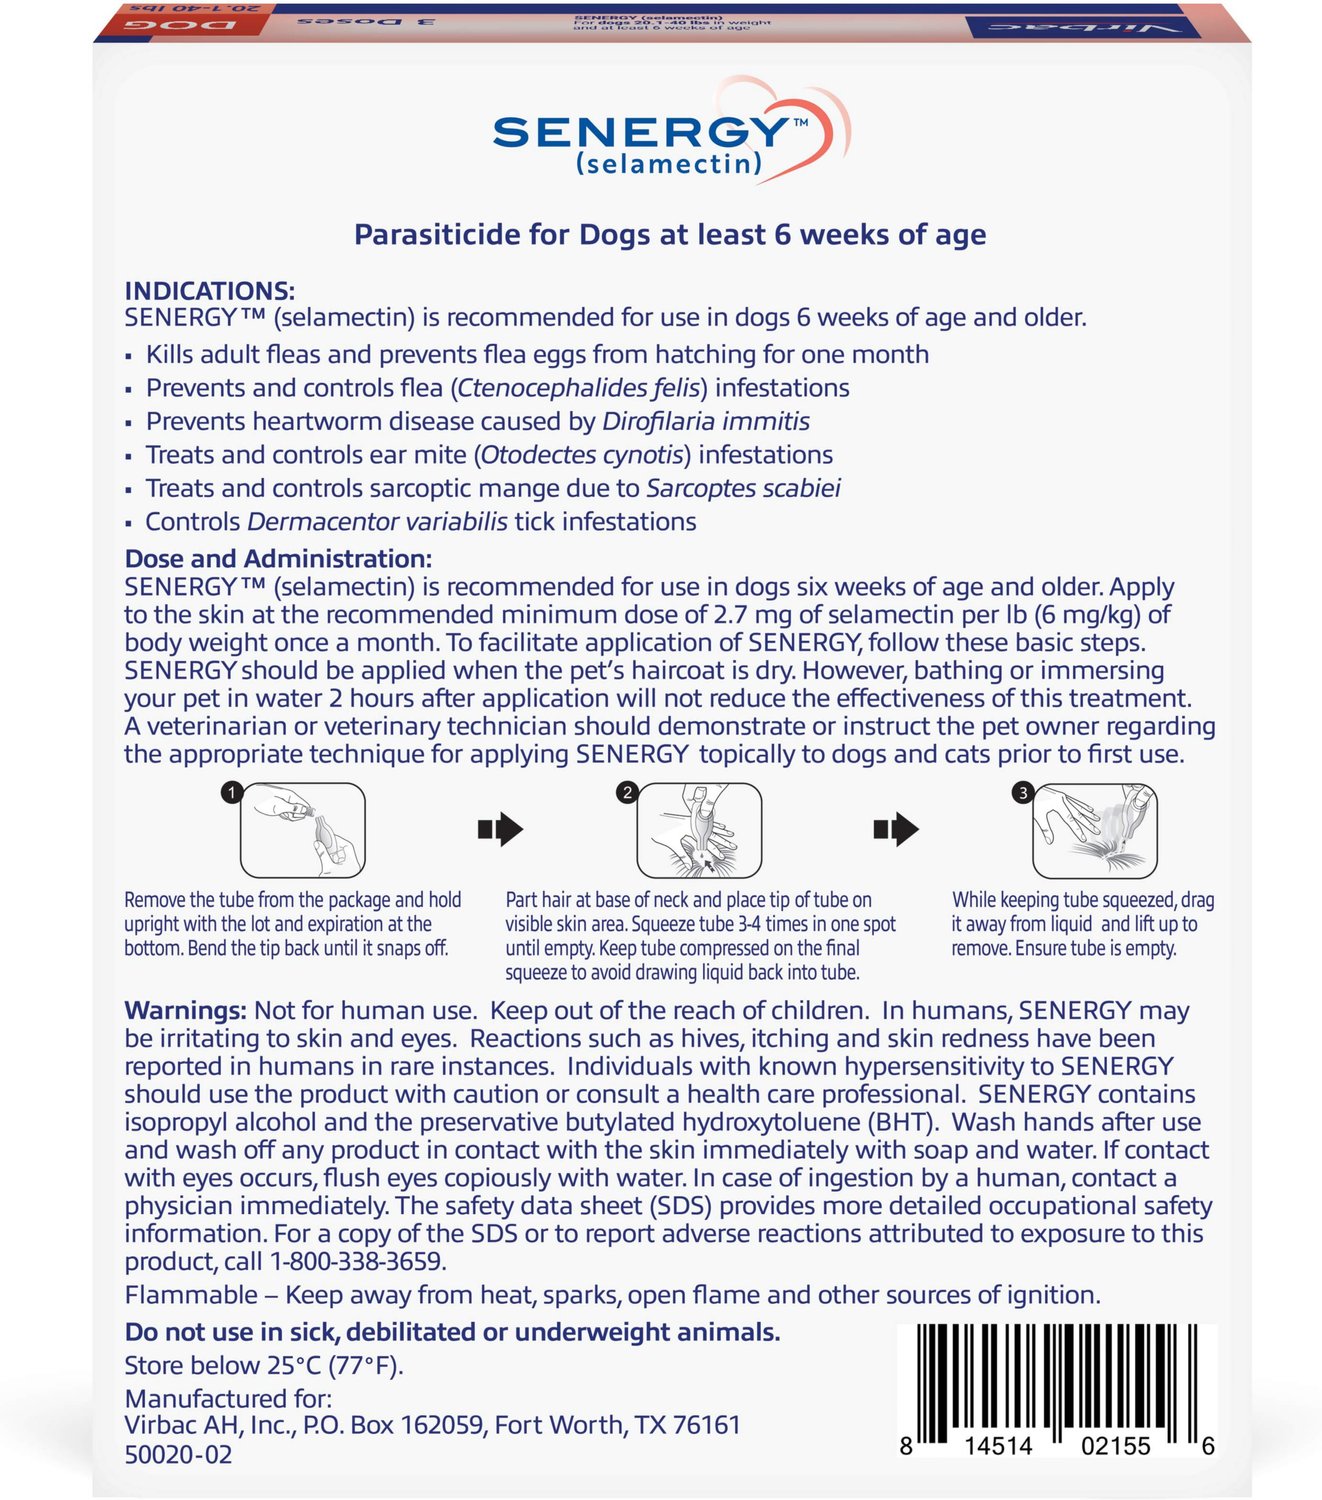 SENERGY Topical Solution for Dogs, 20.140 lbs, (Red Box), 3 Doses (3